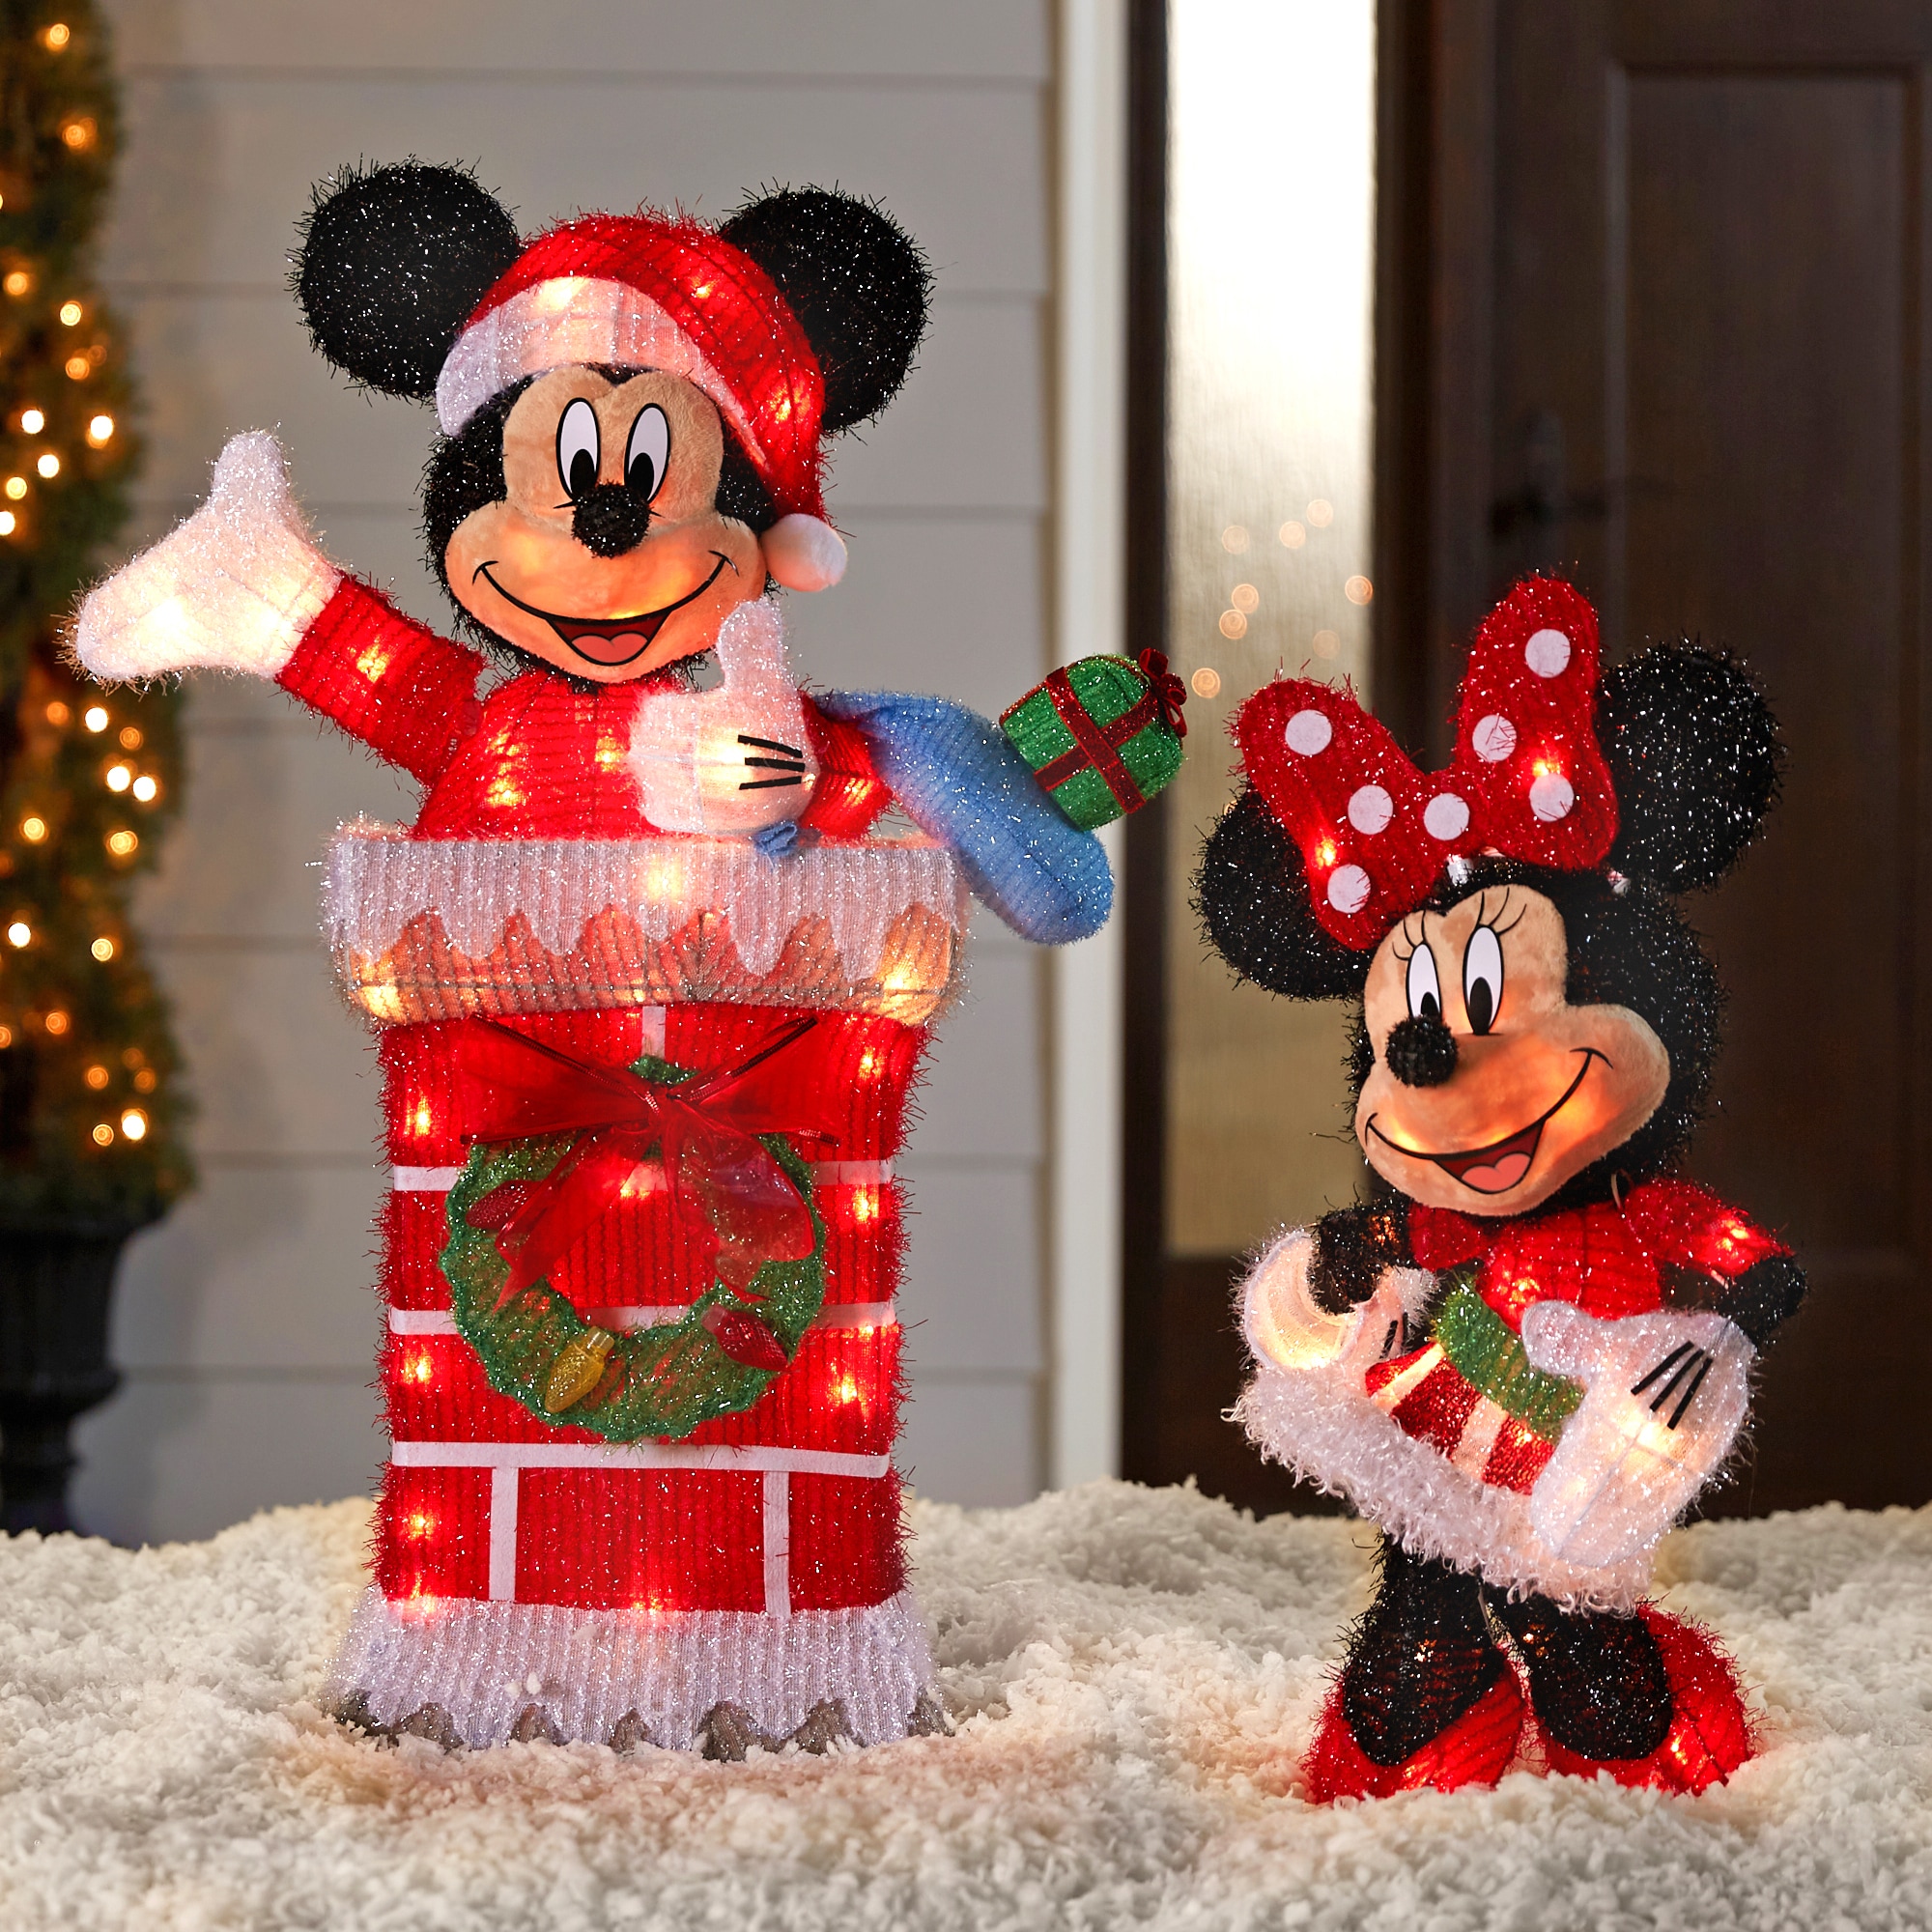 Details about   Disney Magic Holiday Mickey Mouse Lighted Tinsel Yard Sculpture Art Christmas 